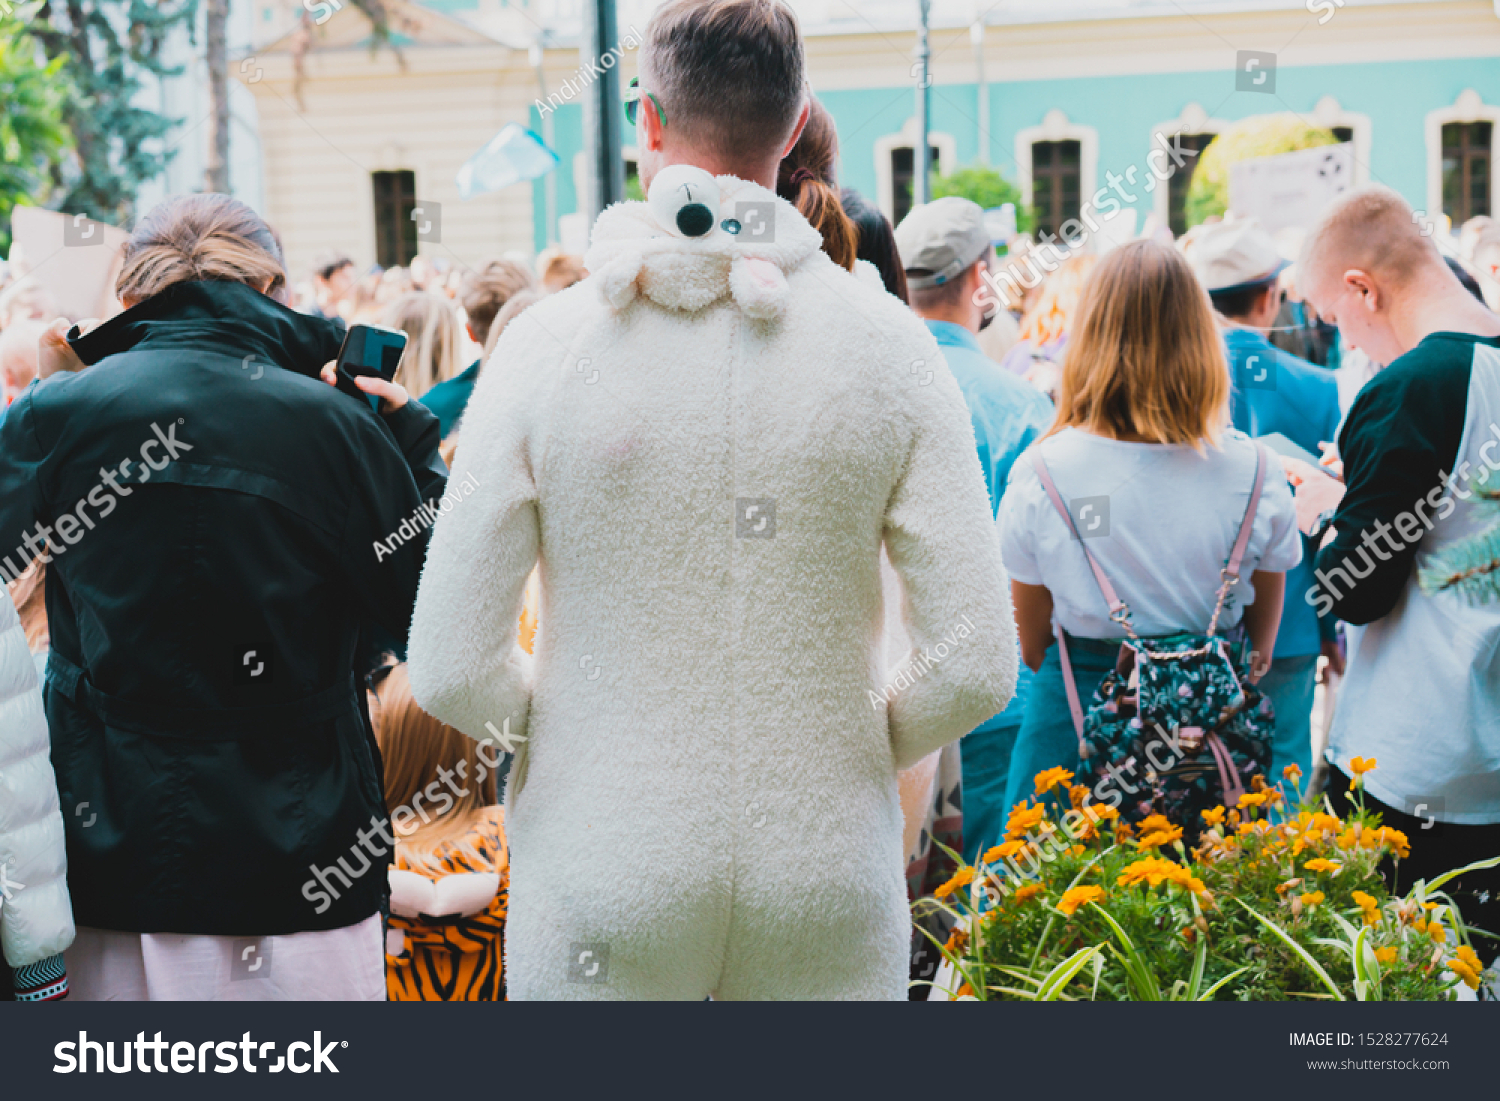 Man wears white bear costume in crowd. Back of male in a costume. Be yourself concept. Wearing pajamas in the city #1528277624